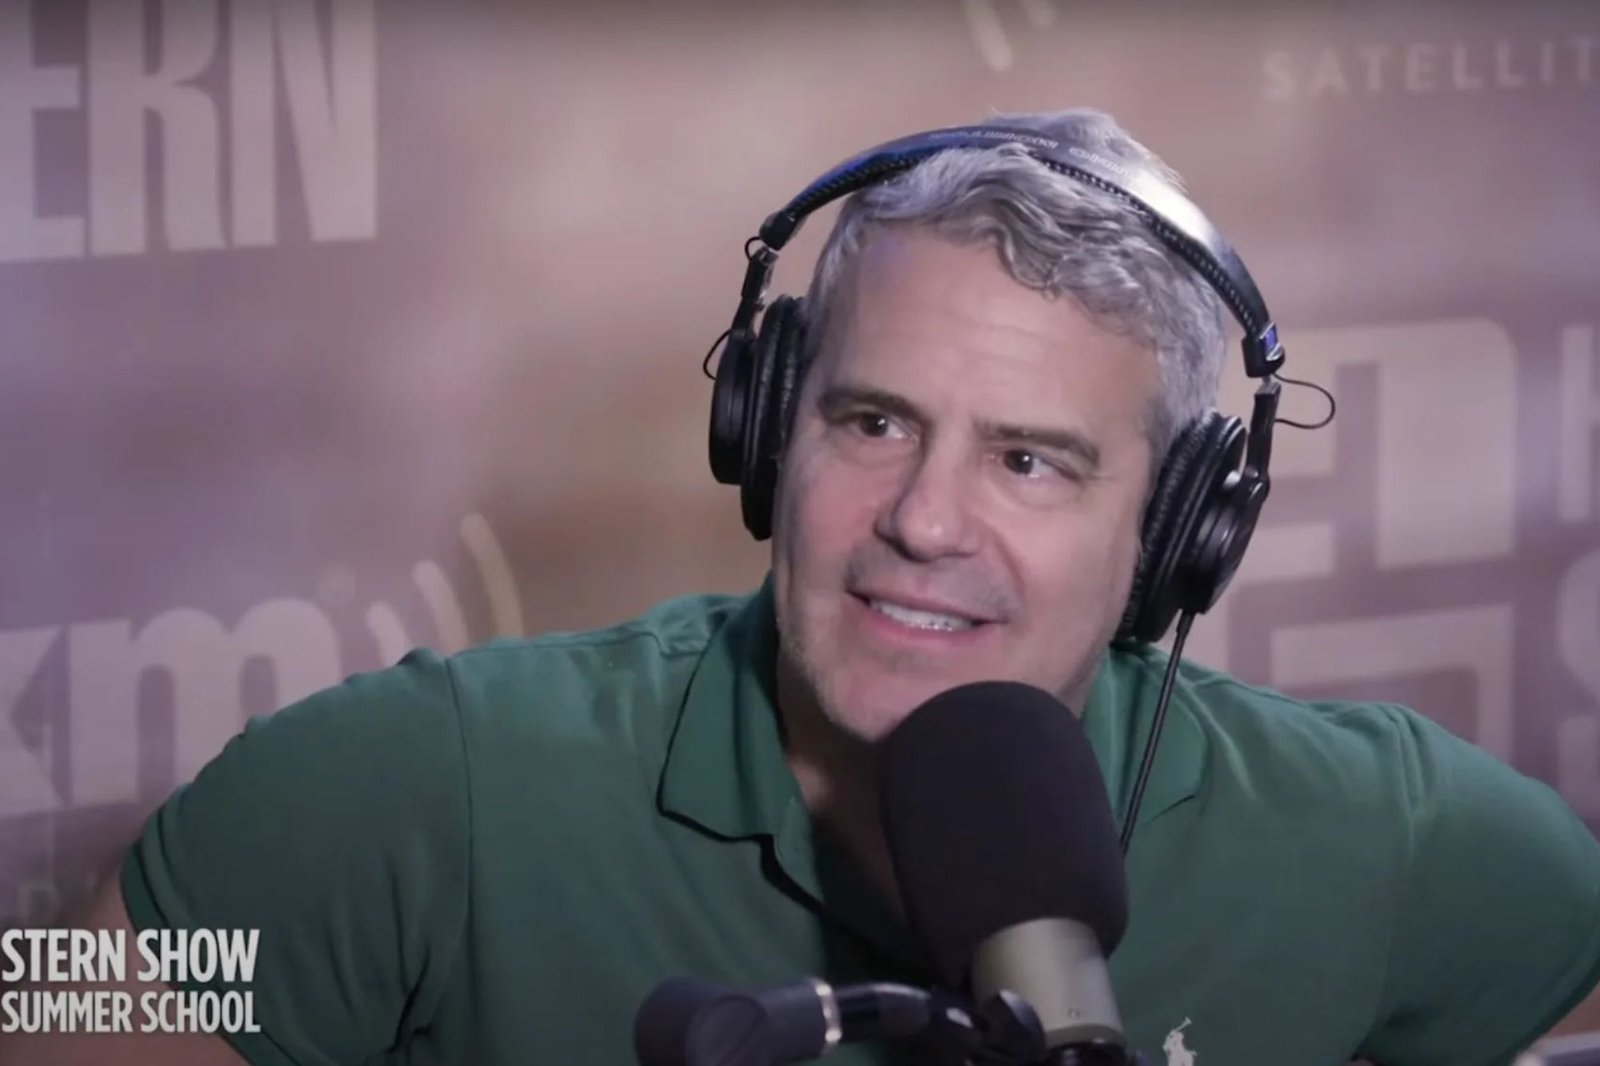 Andy Cohen opens up about dating life as a single dad of two